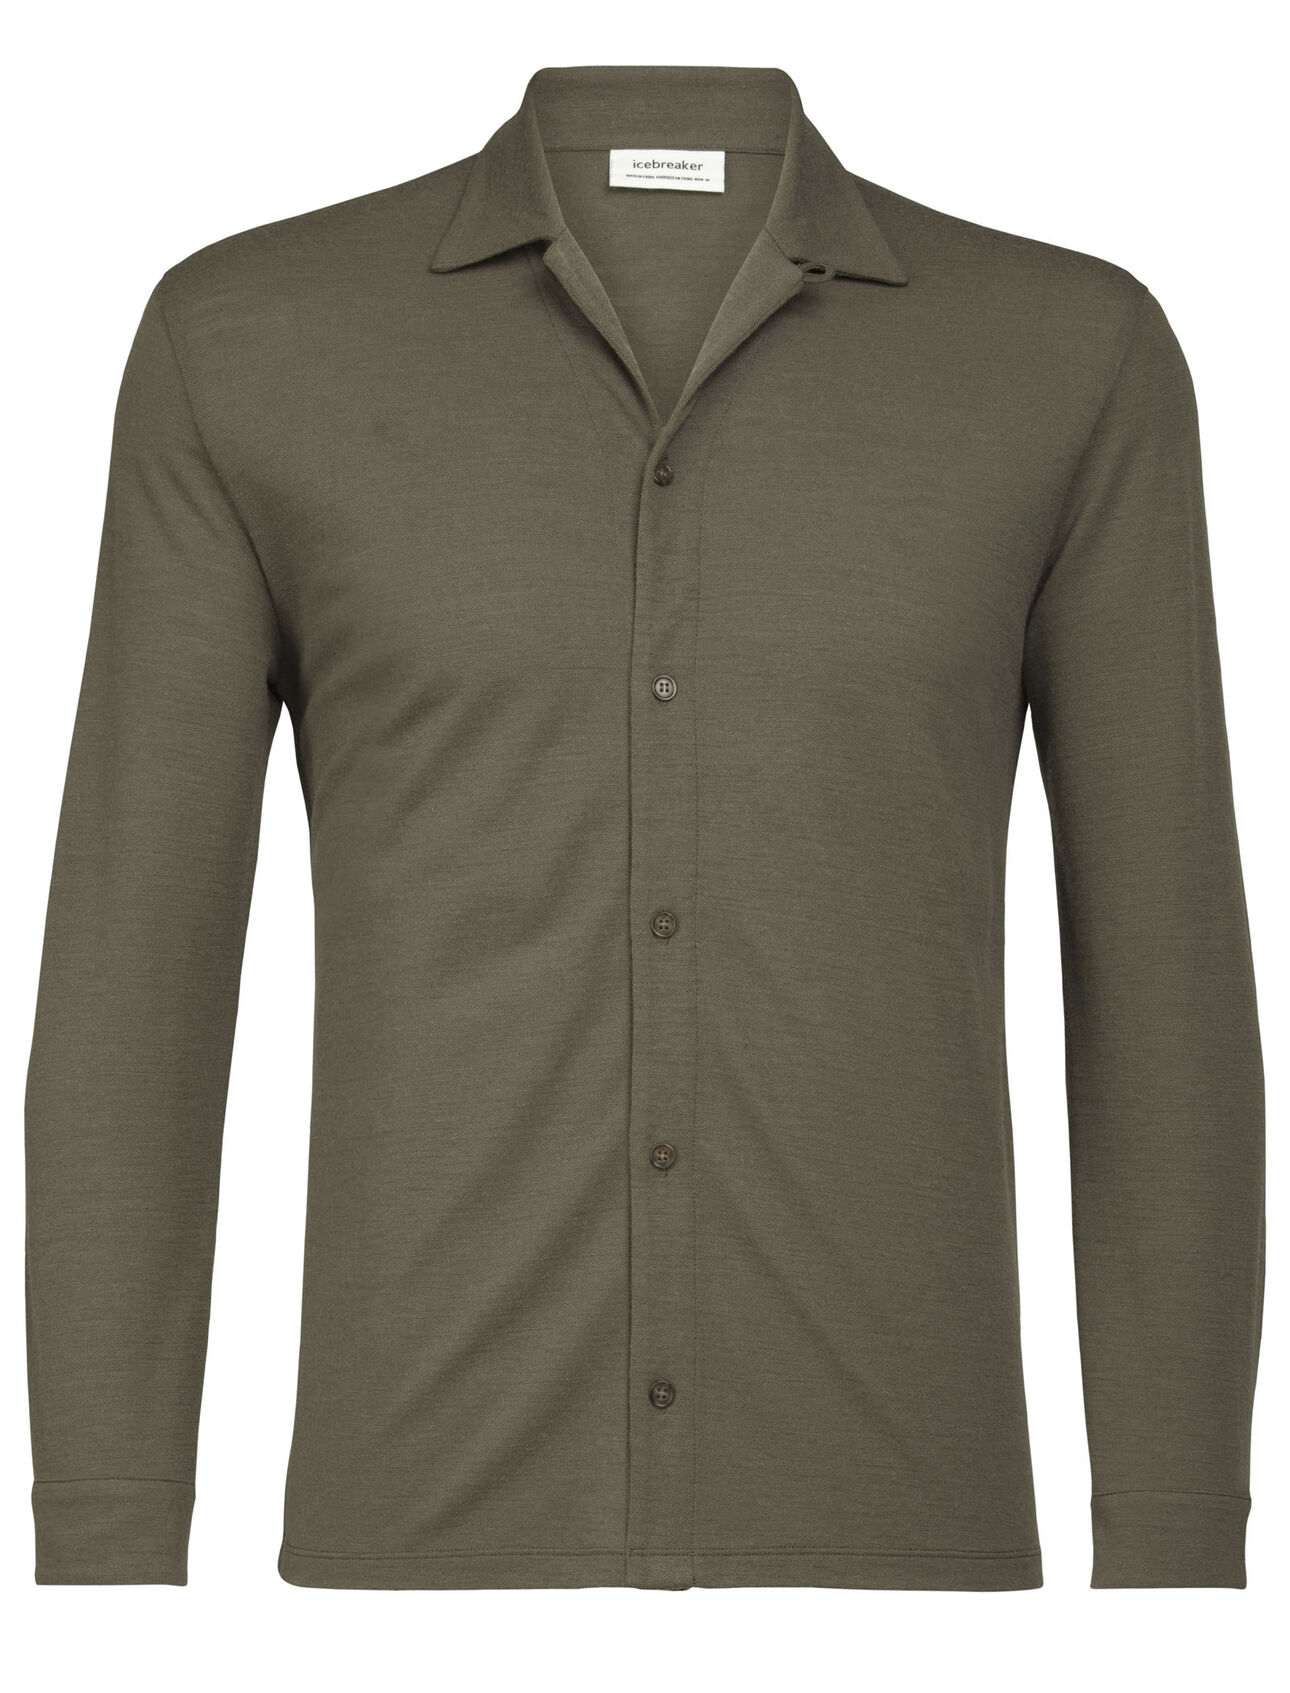 Pánské Merino Pique Long Sleeve Shirt A lightweight, 100% merino top with a classic button-front silhouette, the Merino Pique Long Sleeve Shirt is reliable, stylish and full of everyday comfort.